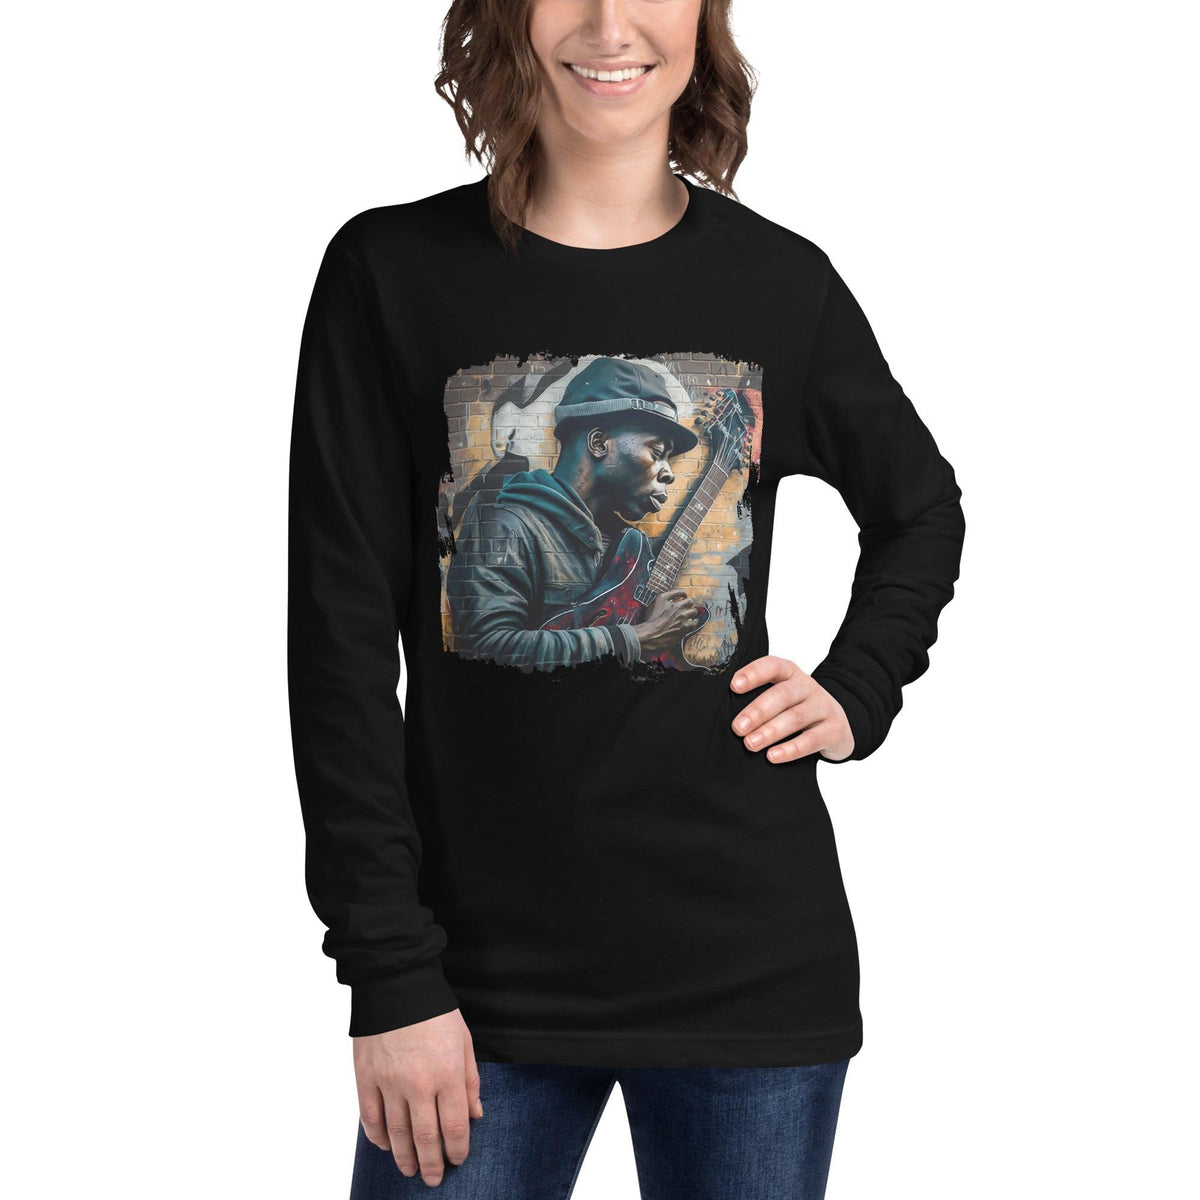 Rocking Out, Feeling Alive Unisex Long Sleeve Tee - Beyond T-shirts